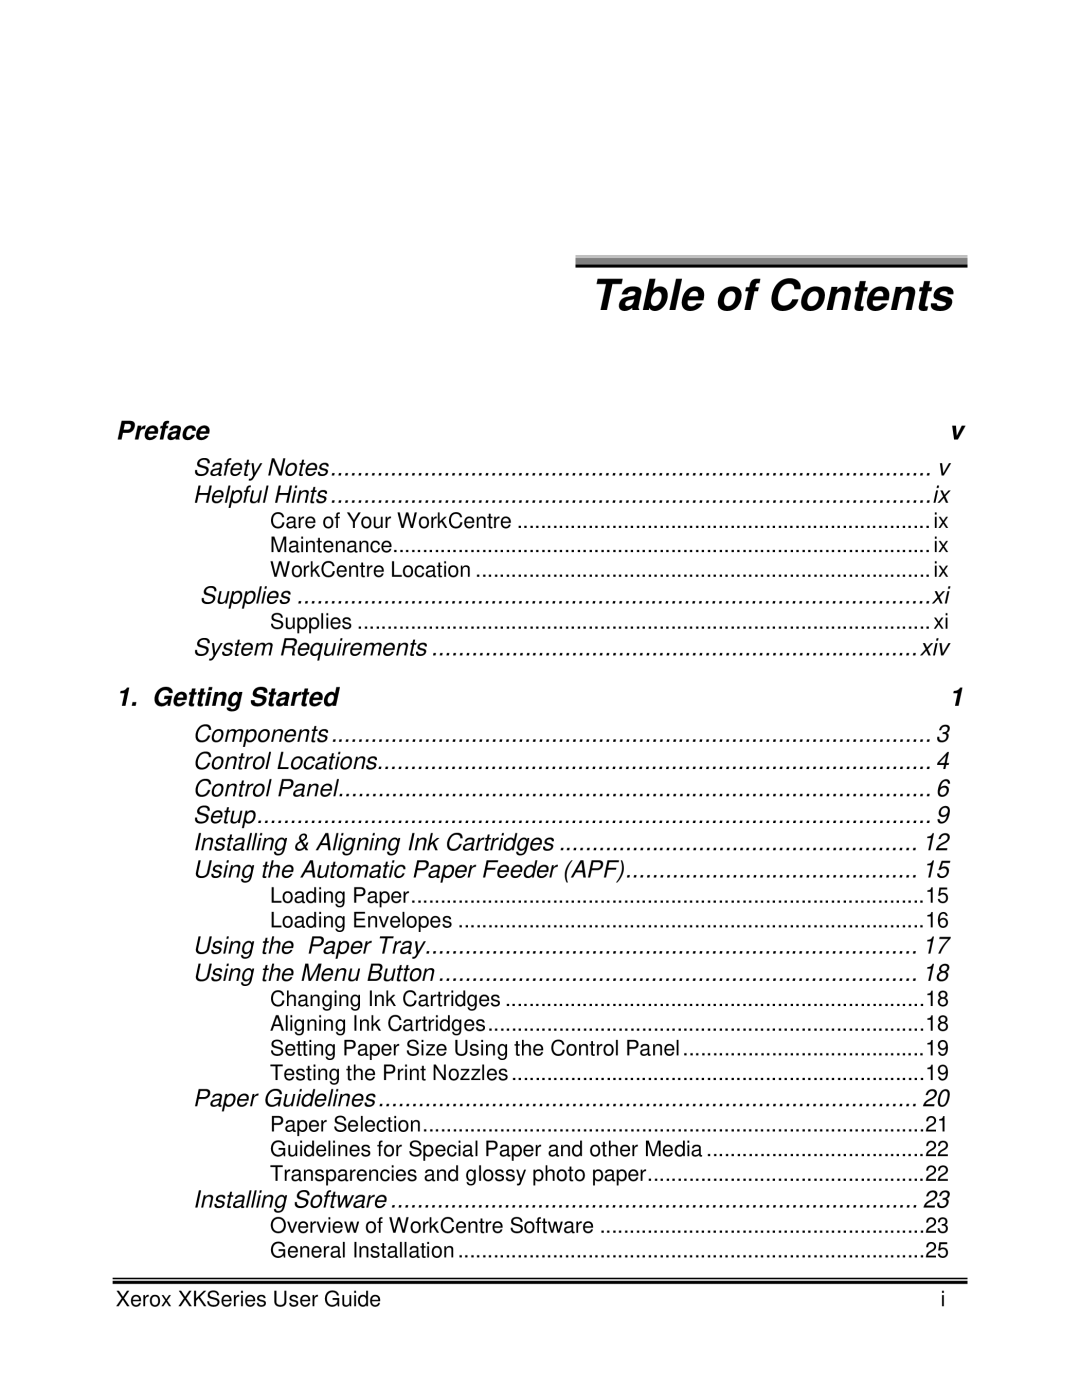 Xerox XK25C, XK35C manual Table of Contents, Preface, Getting Started 